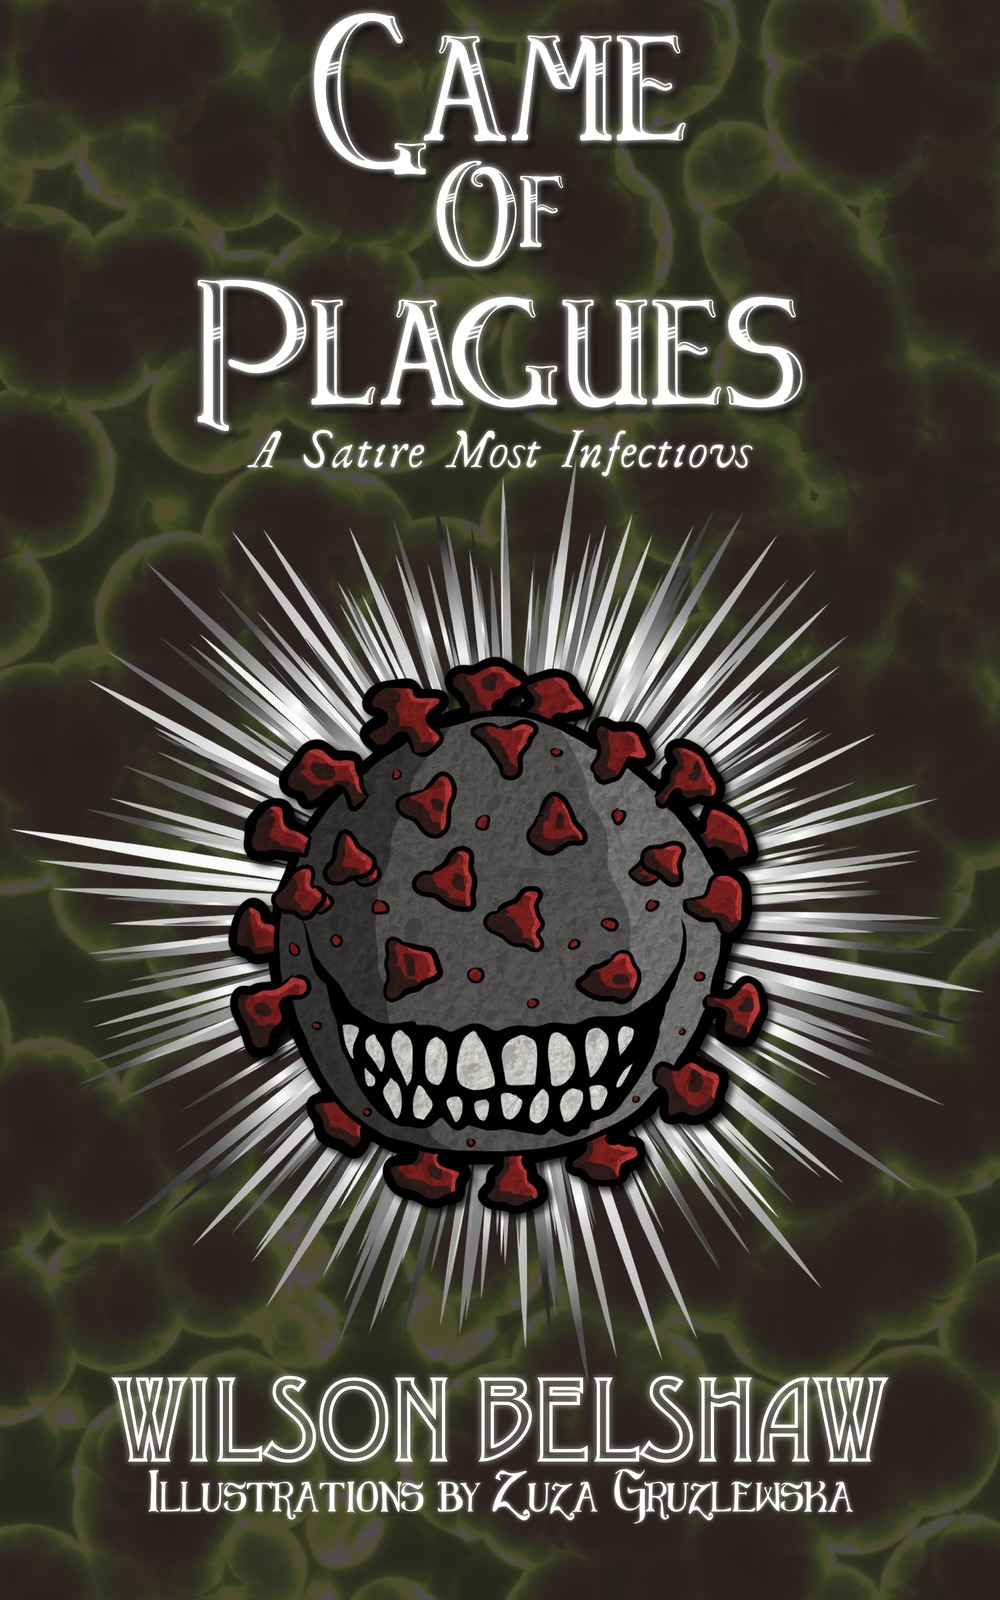 FREE: Game of Plagues by Wilson Belshaw